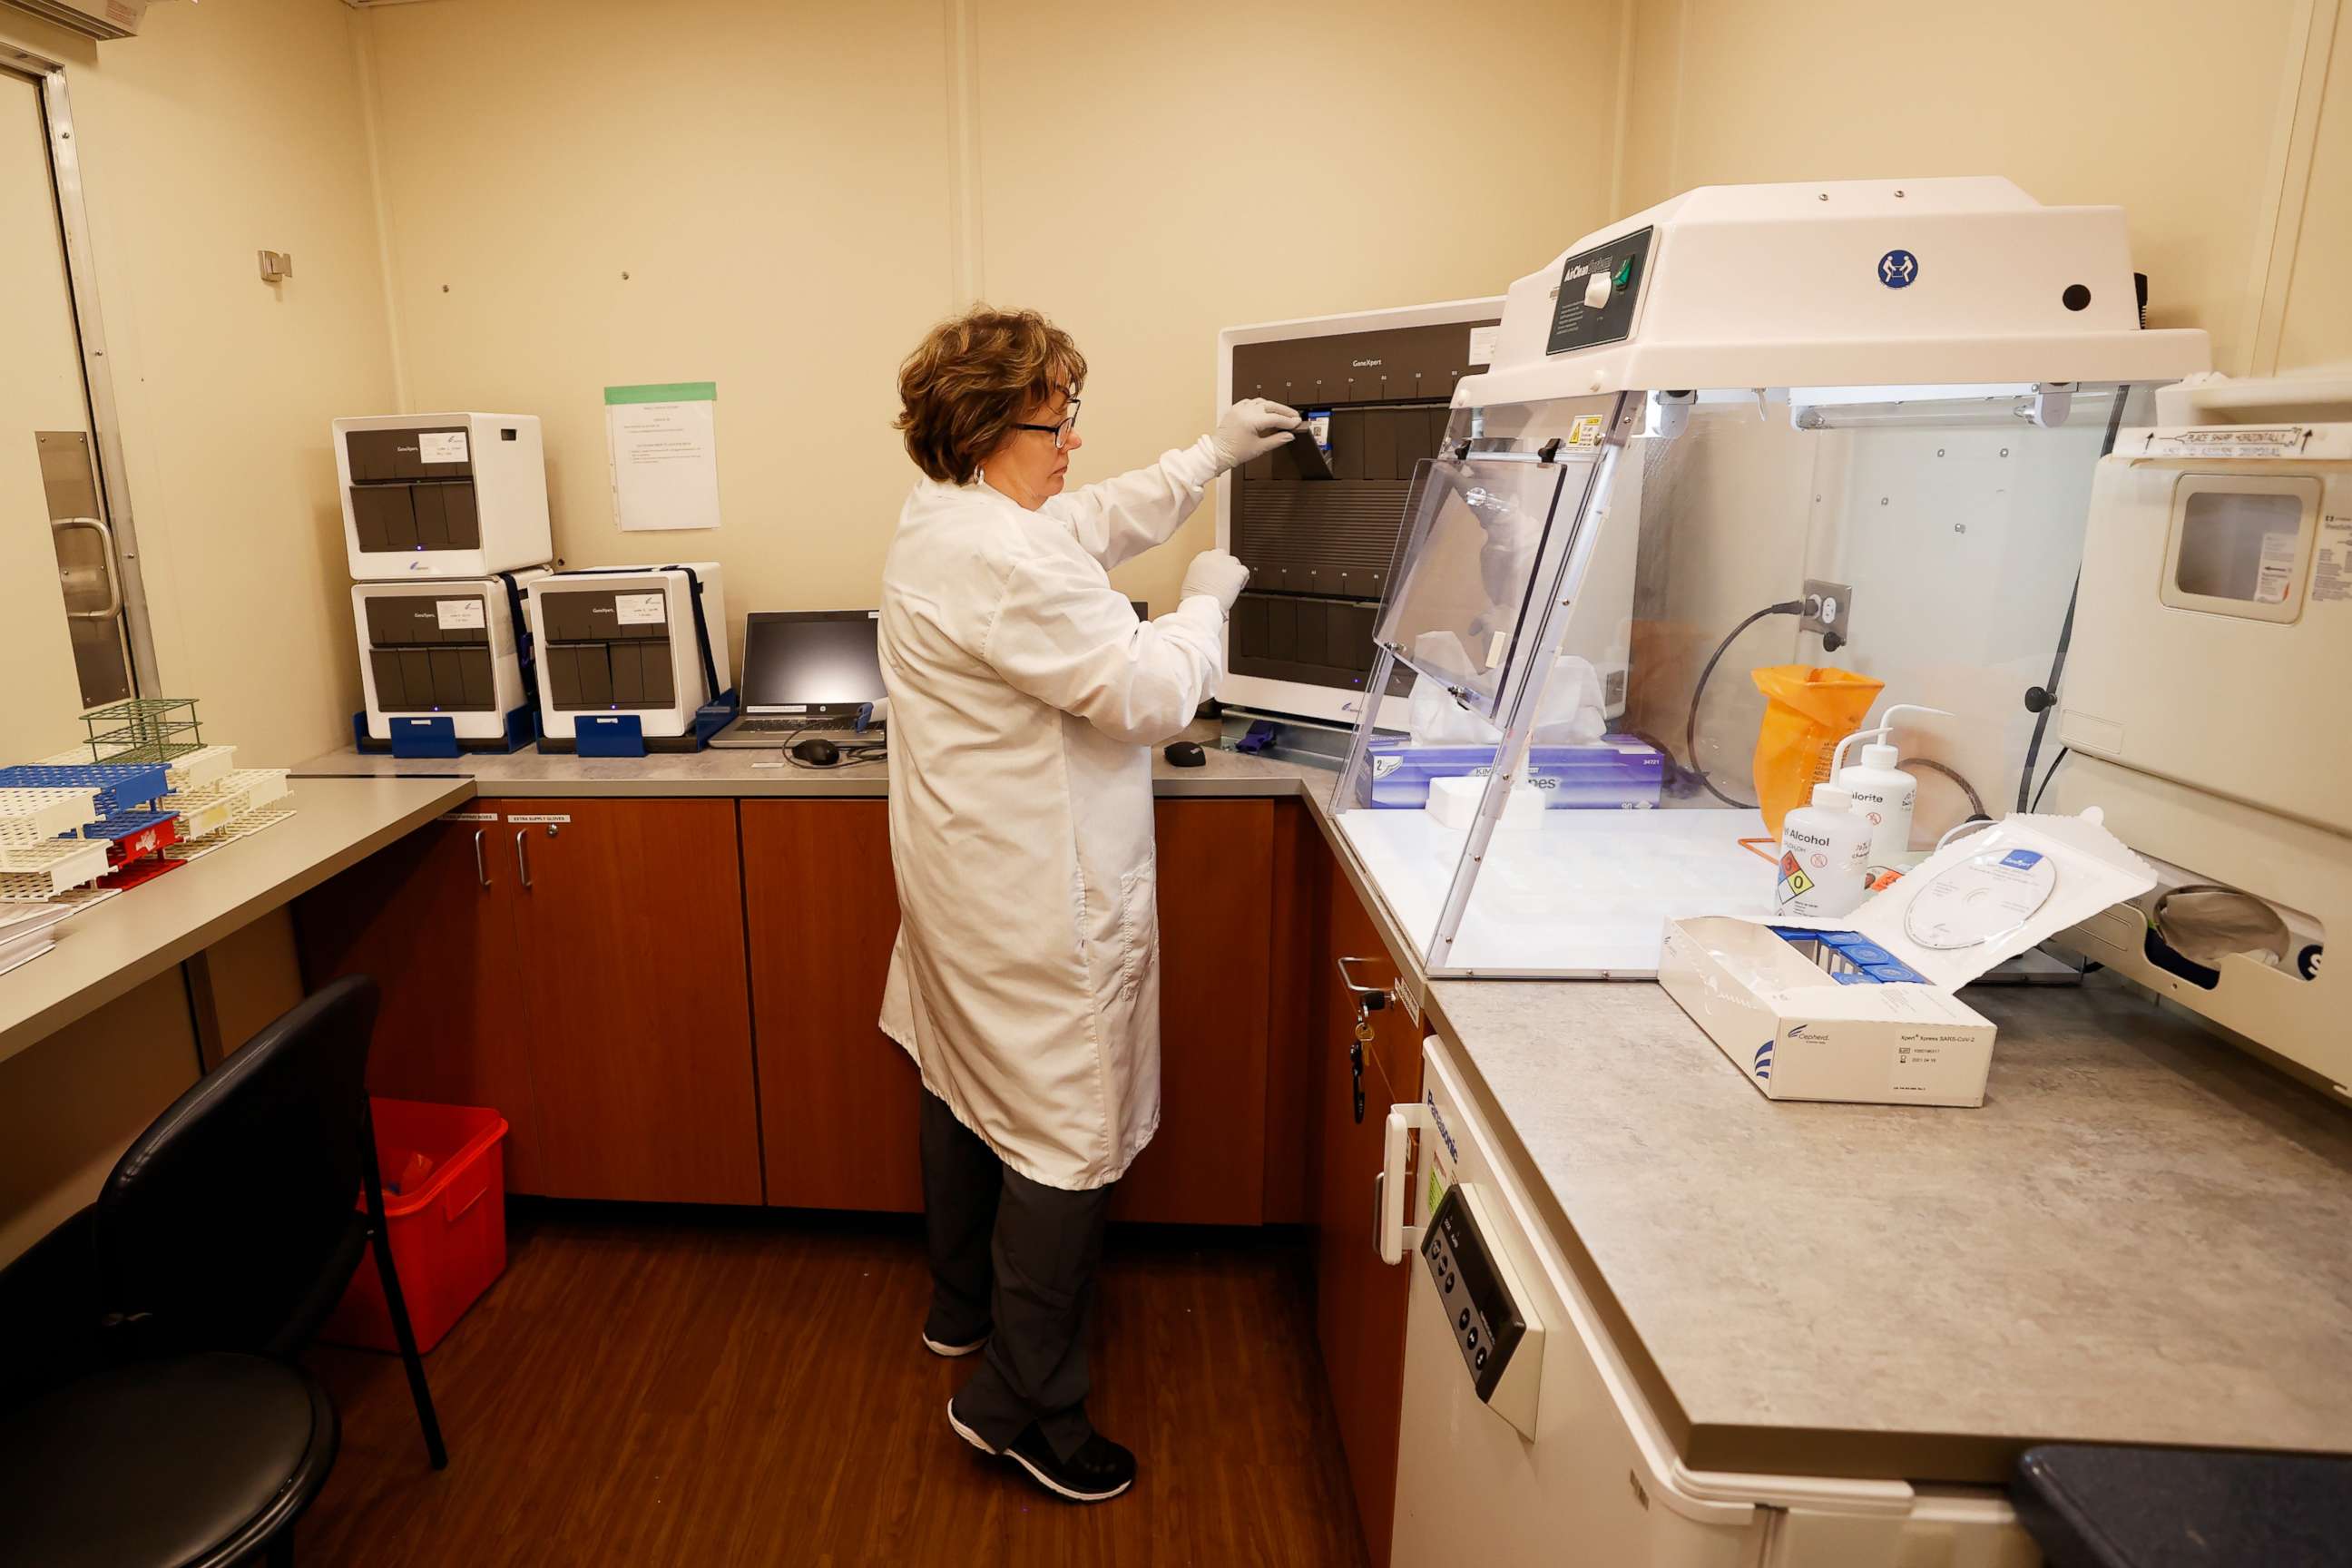 PHOTO: Sanford Health Regulatory Manager Valerie Hieb shows how testing is done at a mobile testing unit, June 9, 2020, in Fort Worth, Texas.